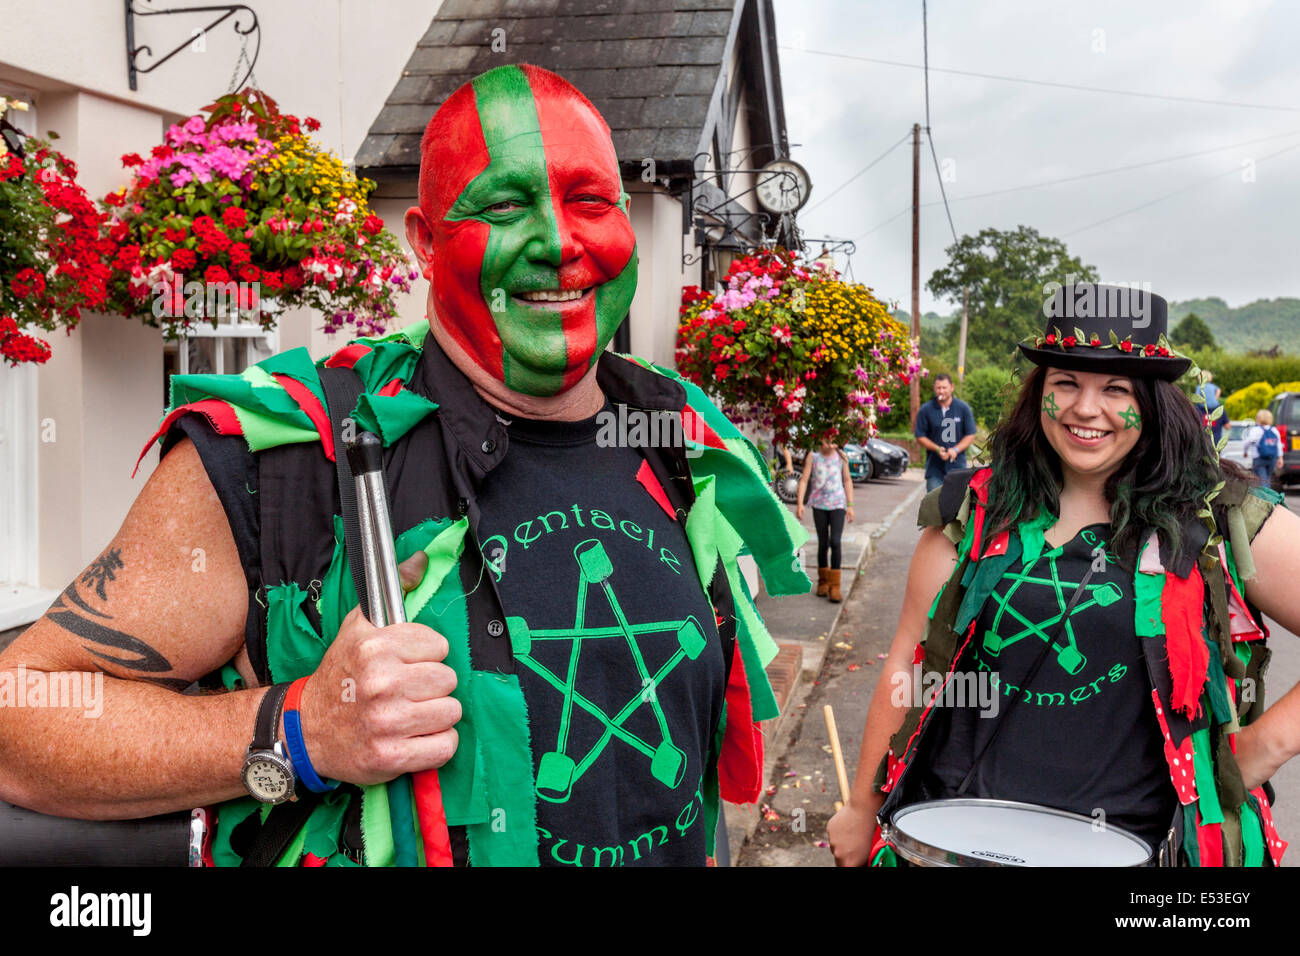 Members Of The Pentacle Drummers About To Perform At The Fairwarp Village Fete, Fairwarp, Sussex, England Stock Photo